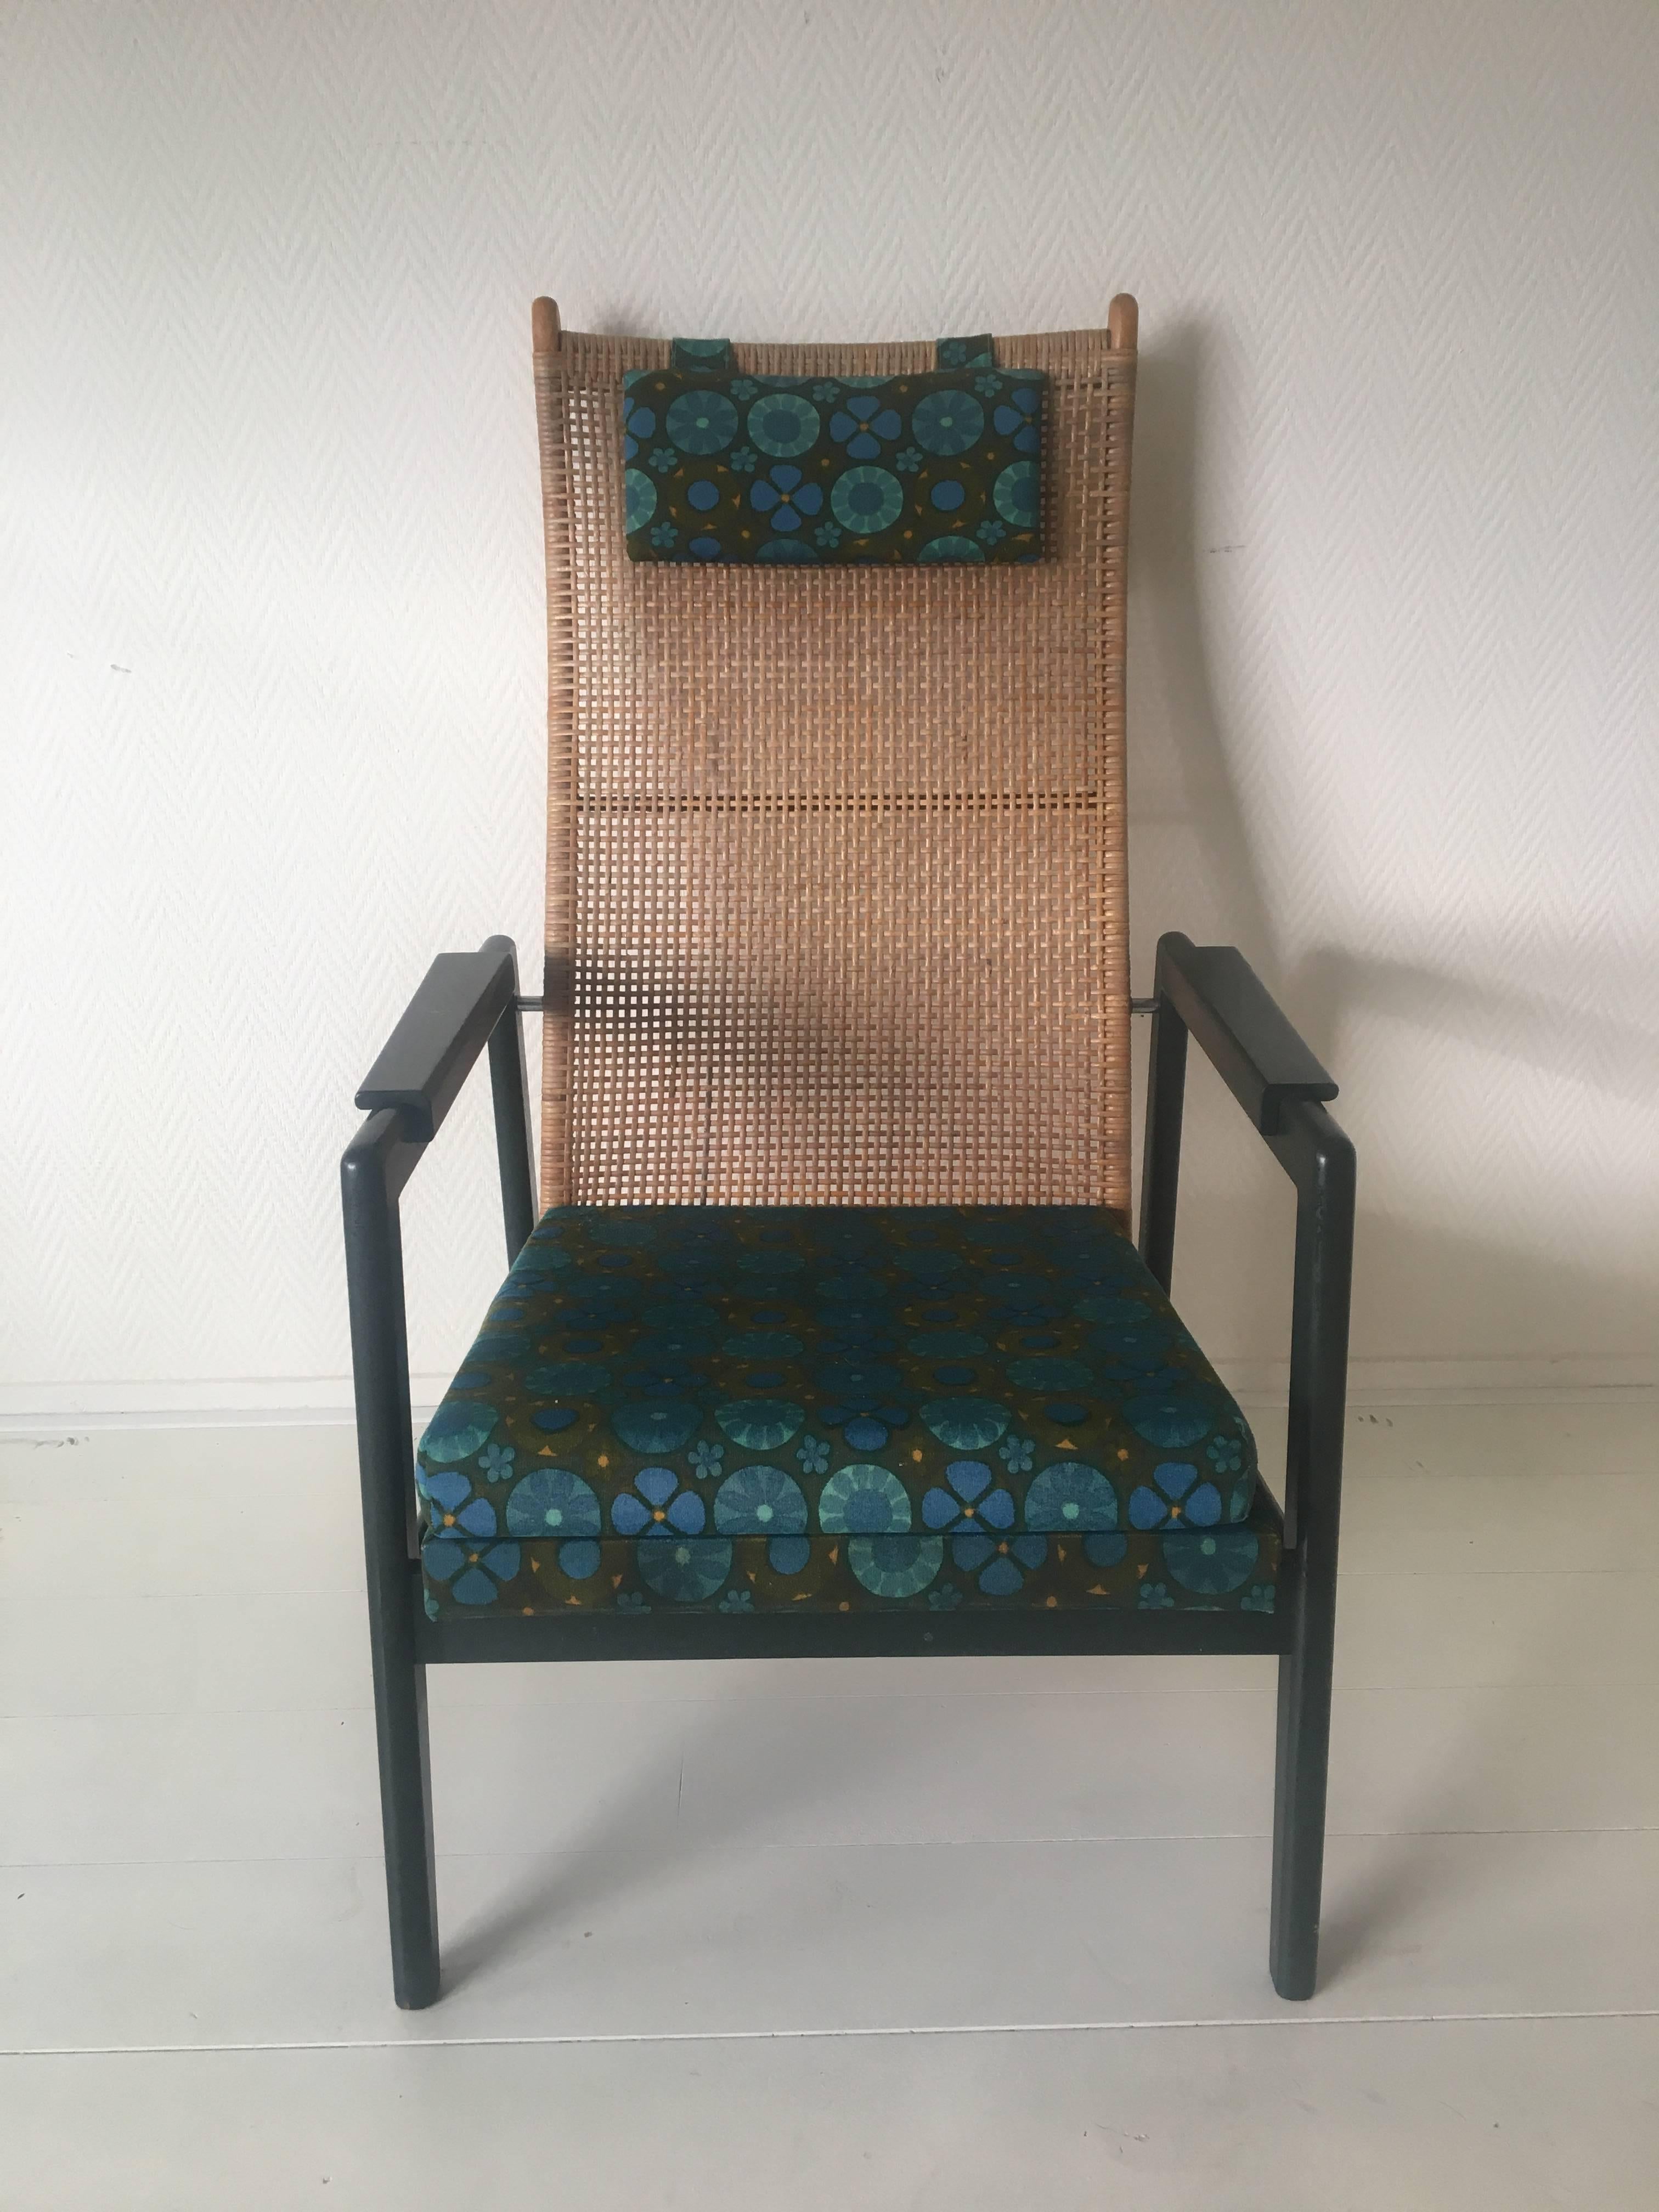 This lounge chair was designed by P. Muntendam for Jonkers in the 1950s-1960s. It features a dark green original lacquered wooden frame and a 'flower power'/bohemian style printed fabric from the same time period. The back of the chair is made from